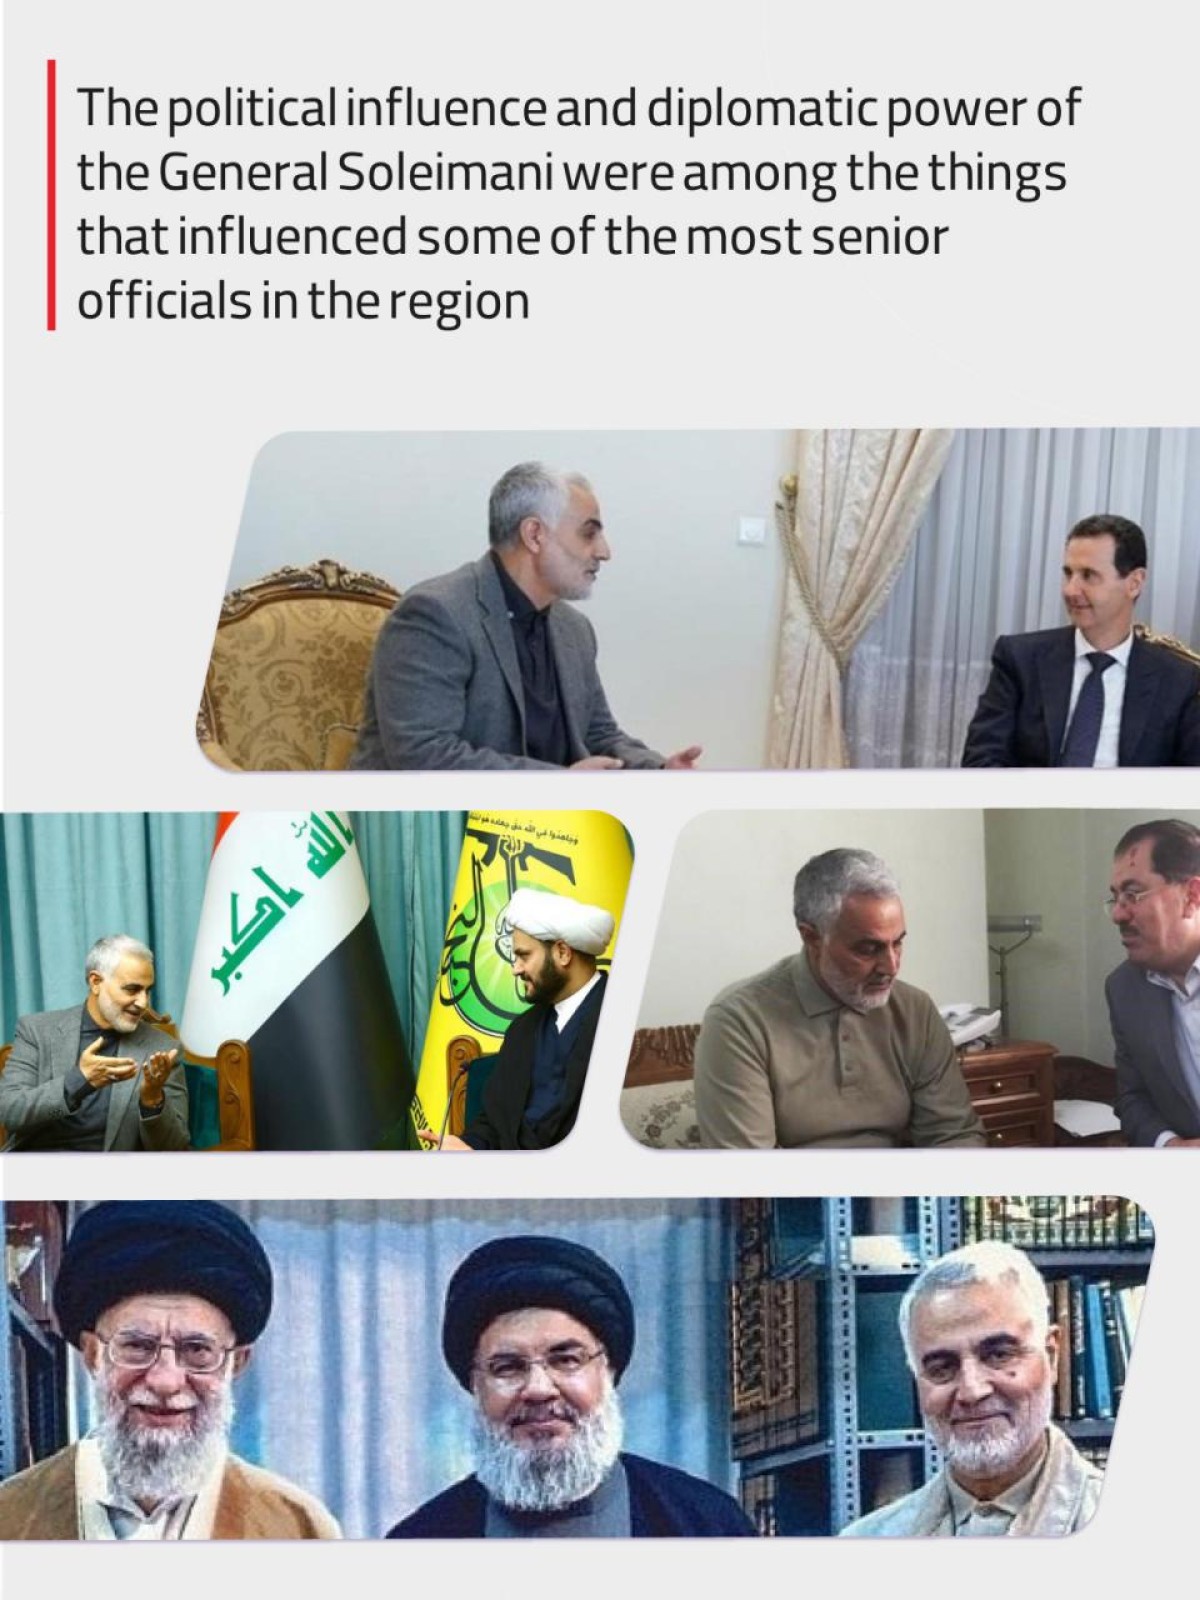 The political influence and diplomatic power of the General Soleimani